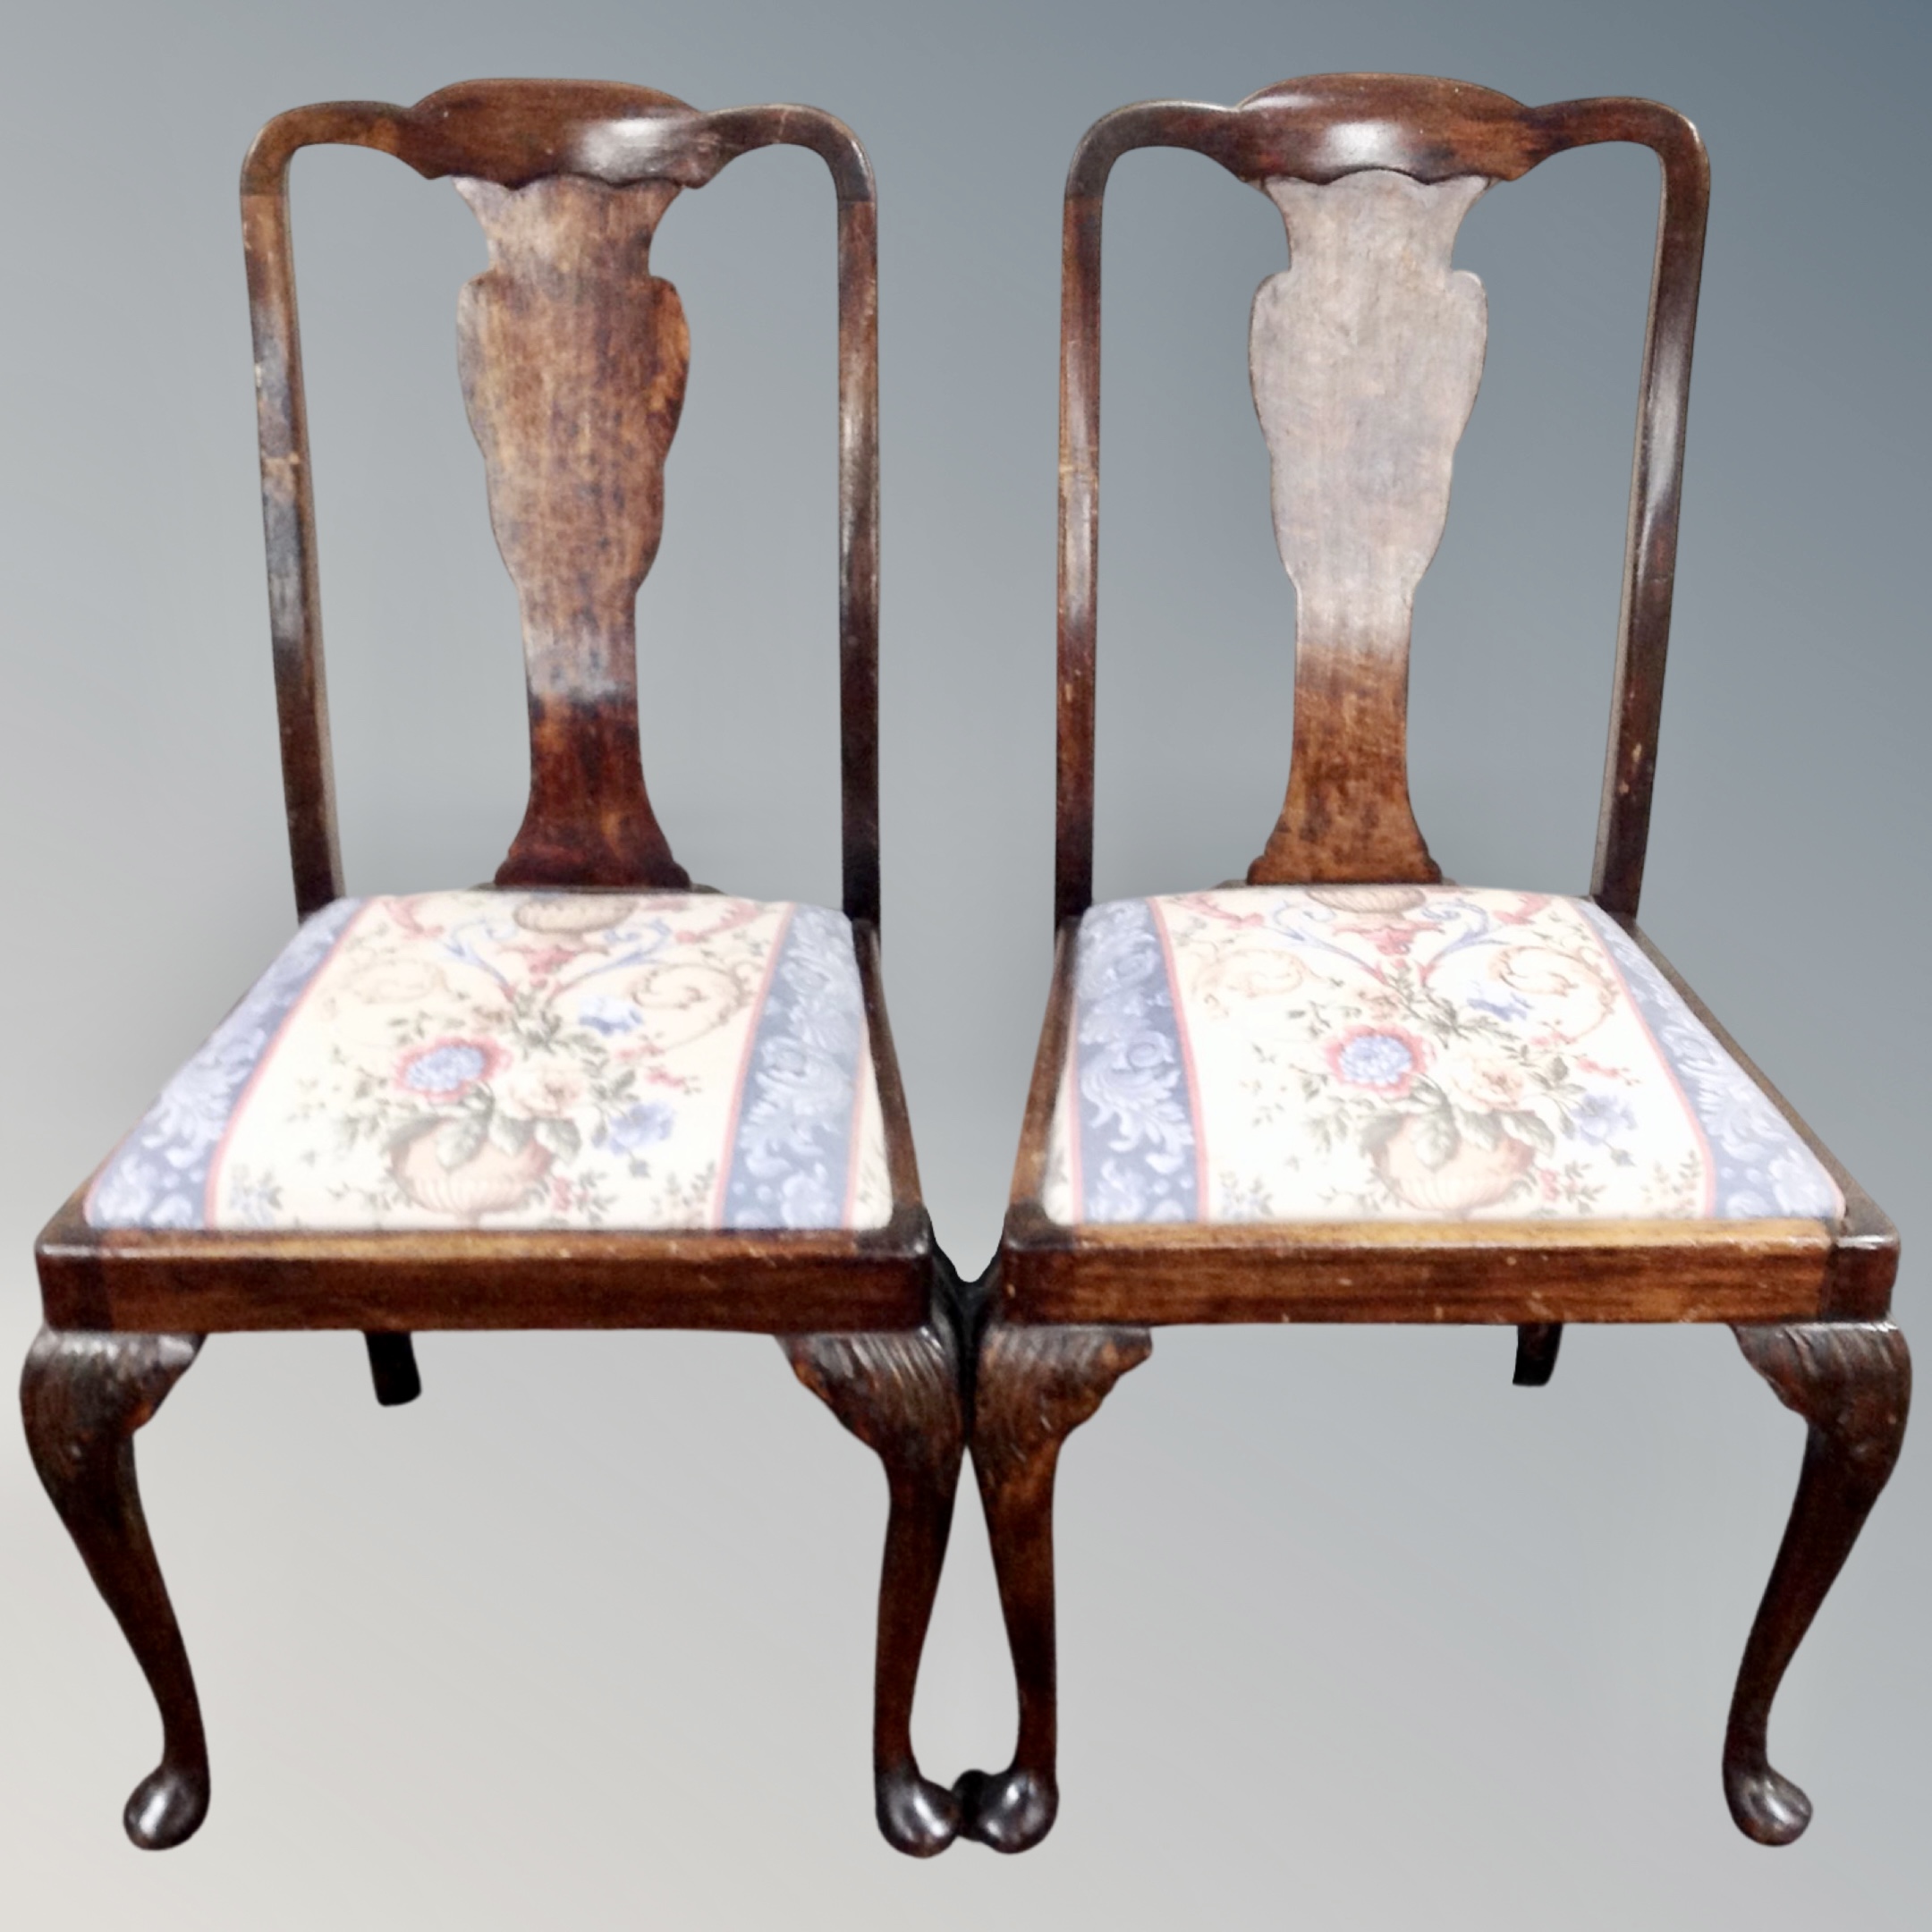 A set of four Edwardian Queen Anne style chairs and a further pair of chairs (6) - Image 2 of 2